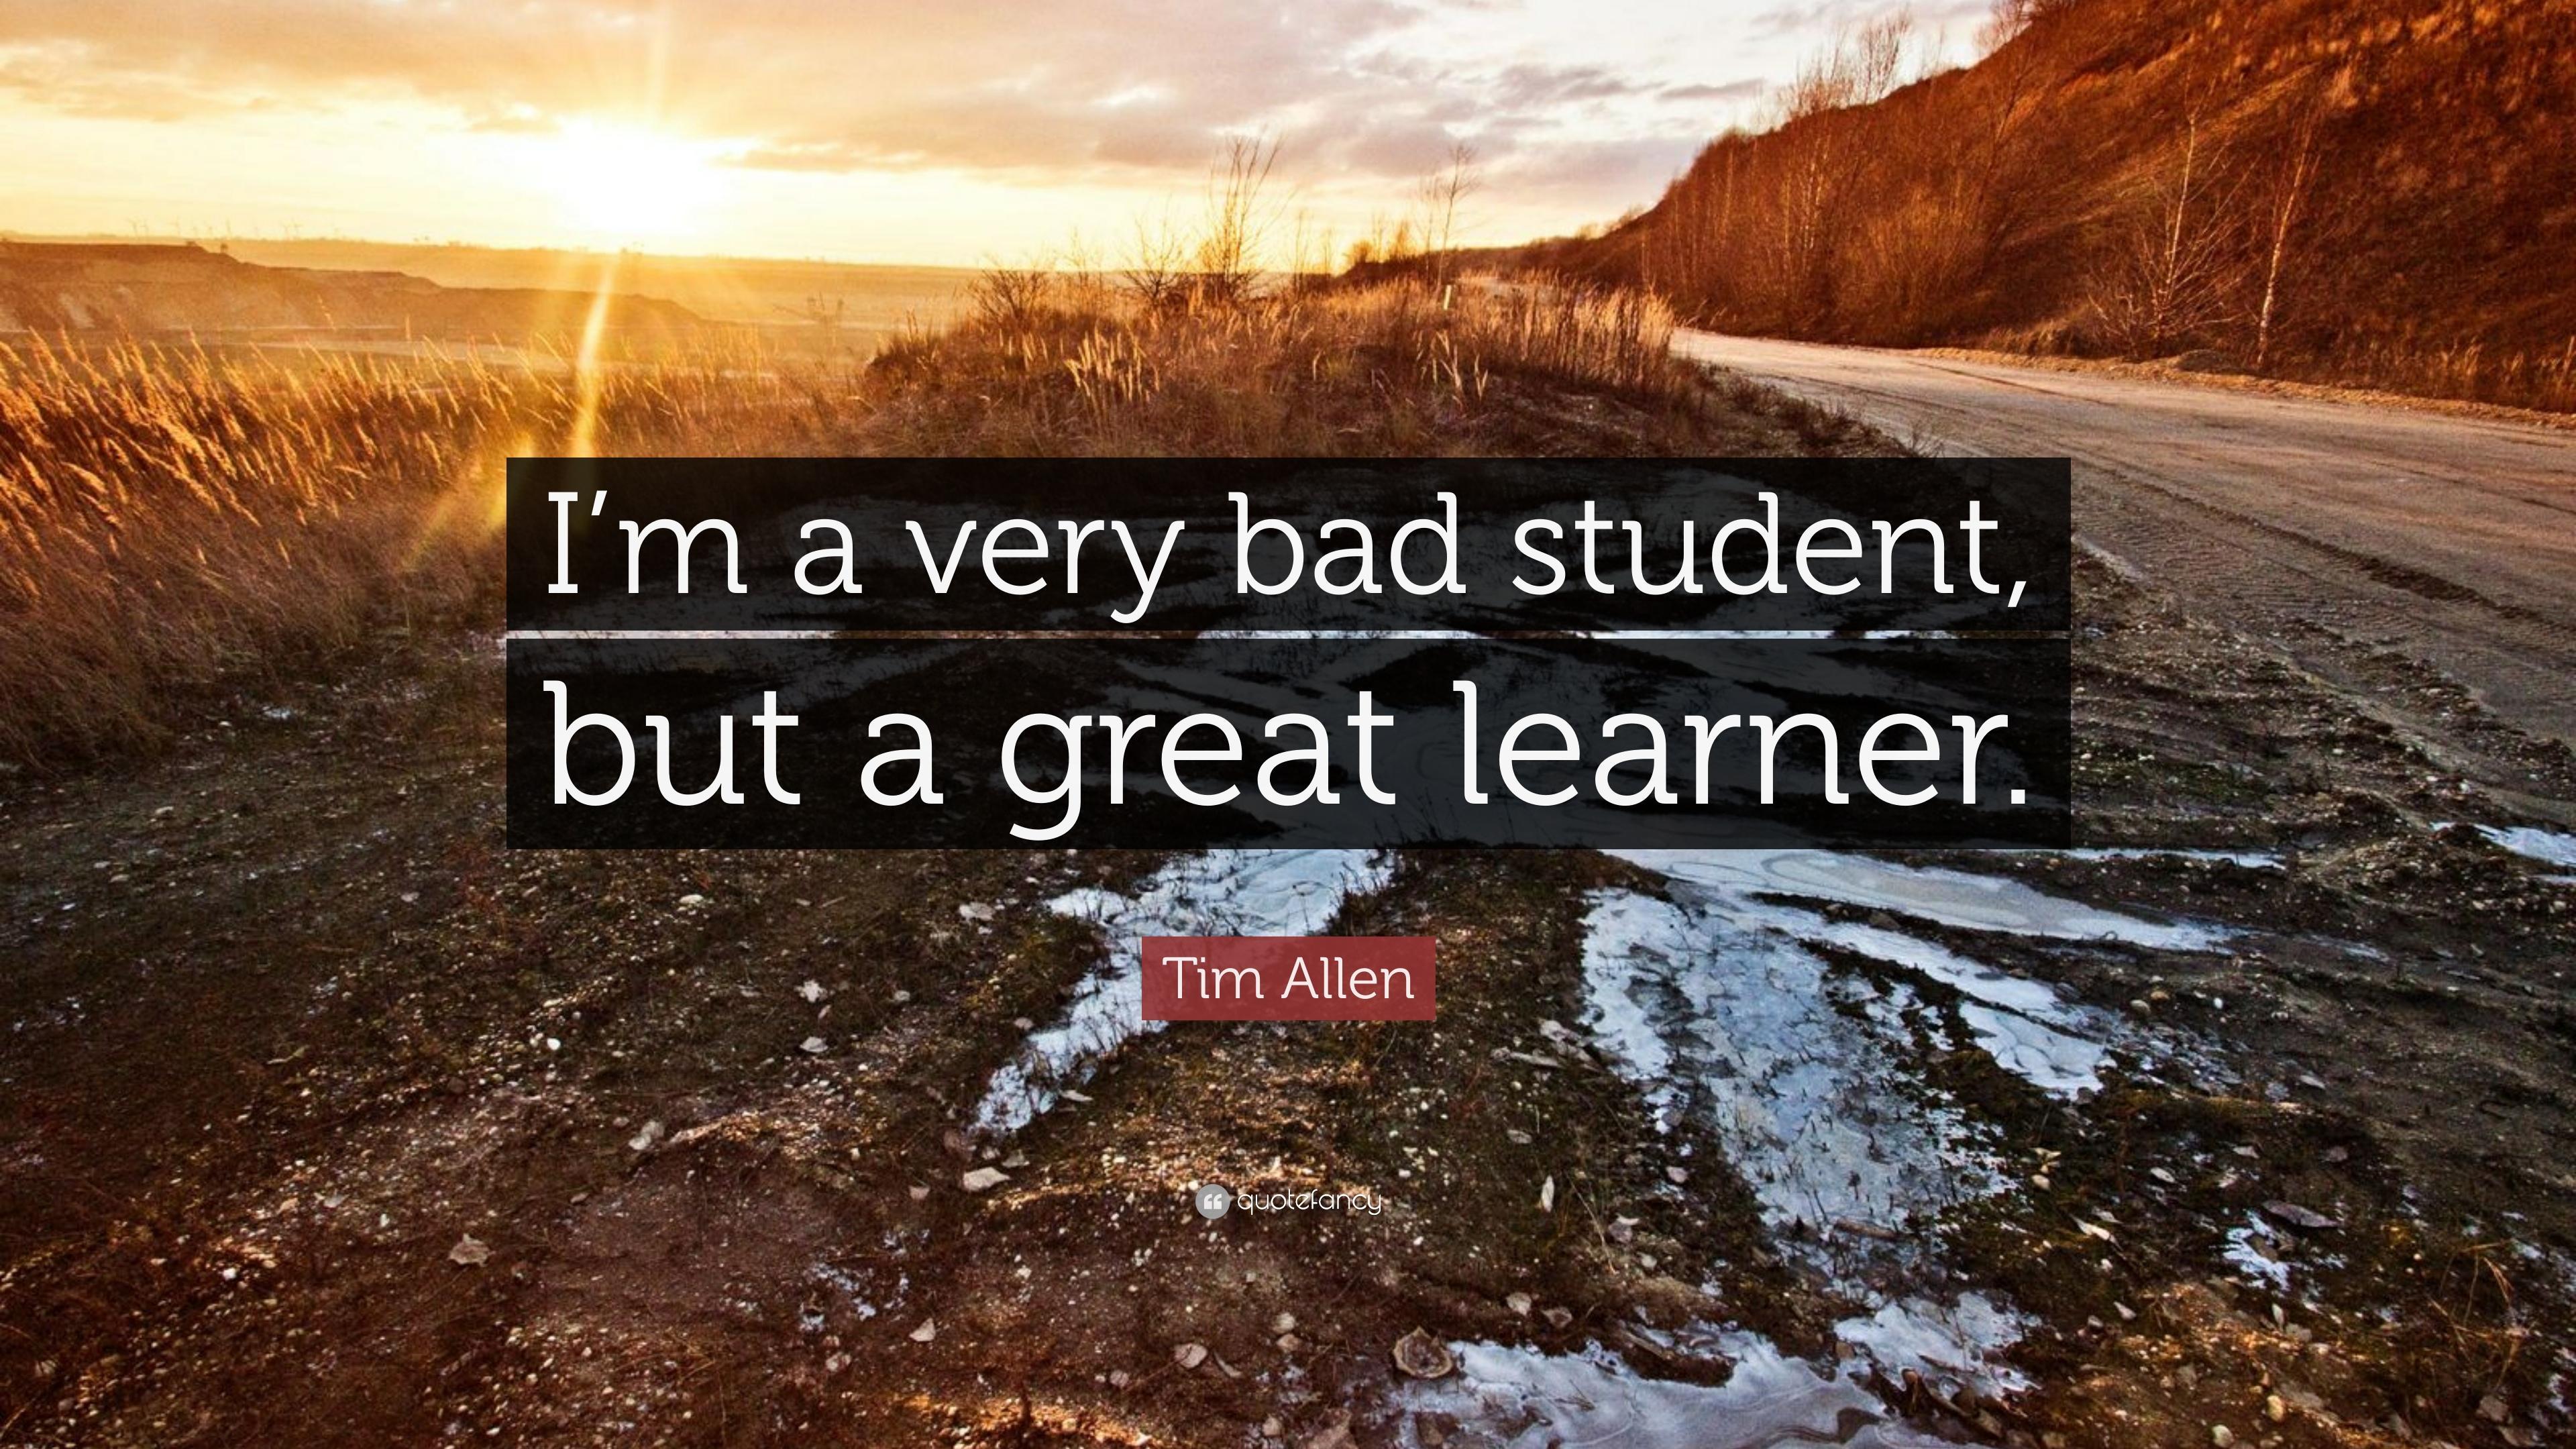 Tim Allen Quote: “I'm a very bad student, but a great